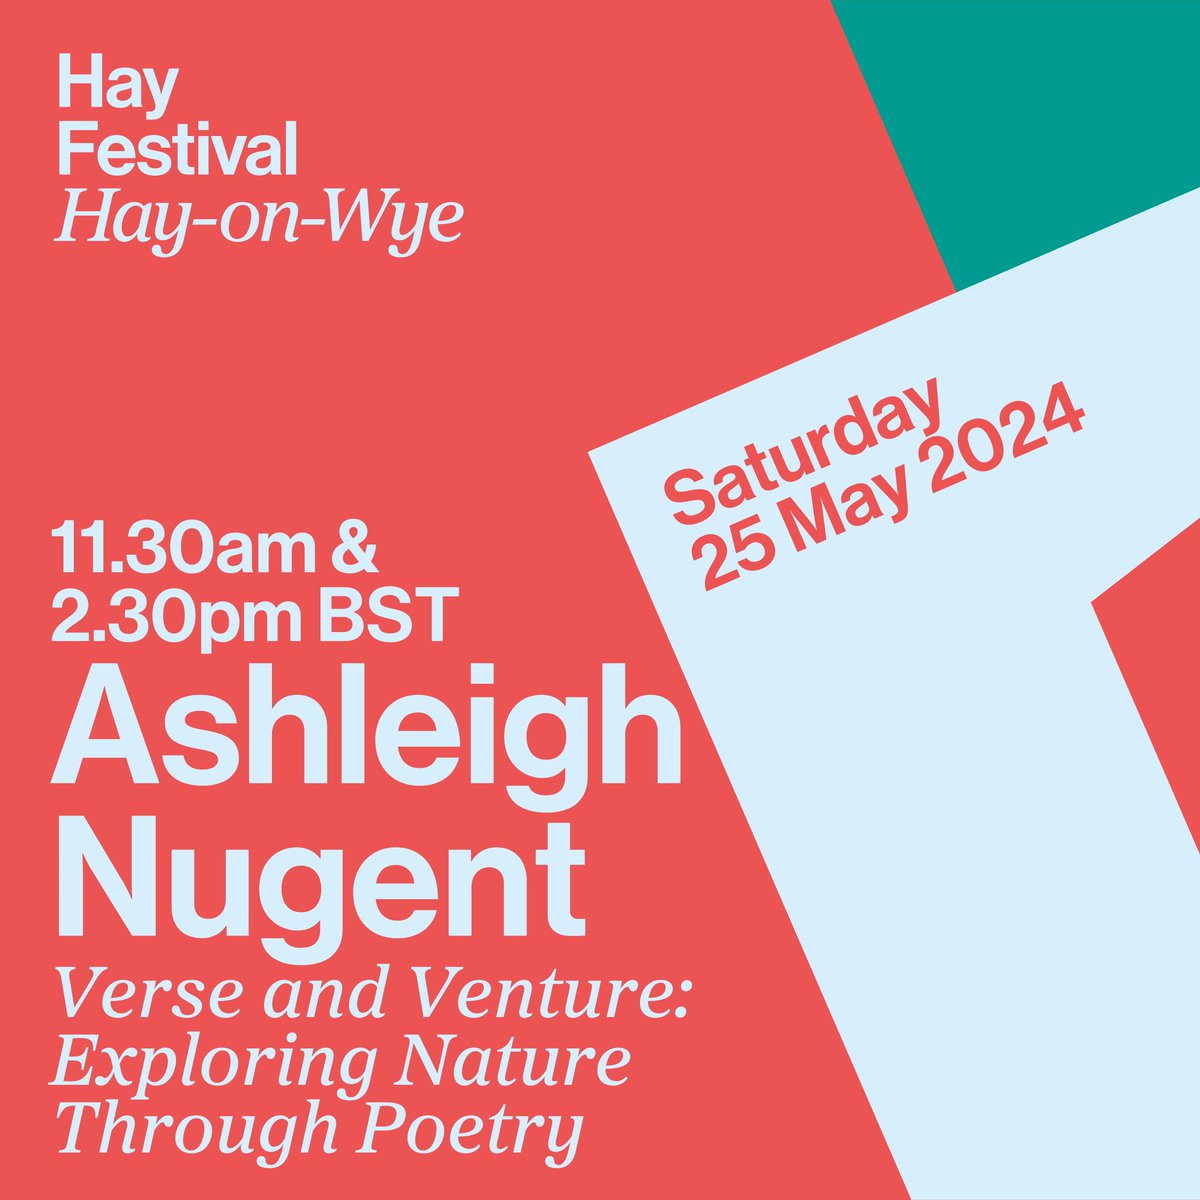 VERSE AND VENTURE: EXPLORING NATURE THROUGH POETRY💪🏿🔥 📚🎉 Next Month, Black British Book Festival goes on @hayfestival for the first time ever!💃🏻🎊 Join us with the incredible poet and playwright @NugentAshleigh on May 25th 2024 as we have an exciting time of poetry.